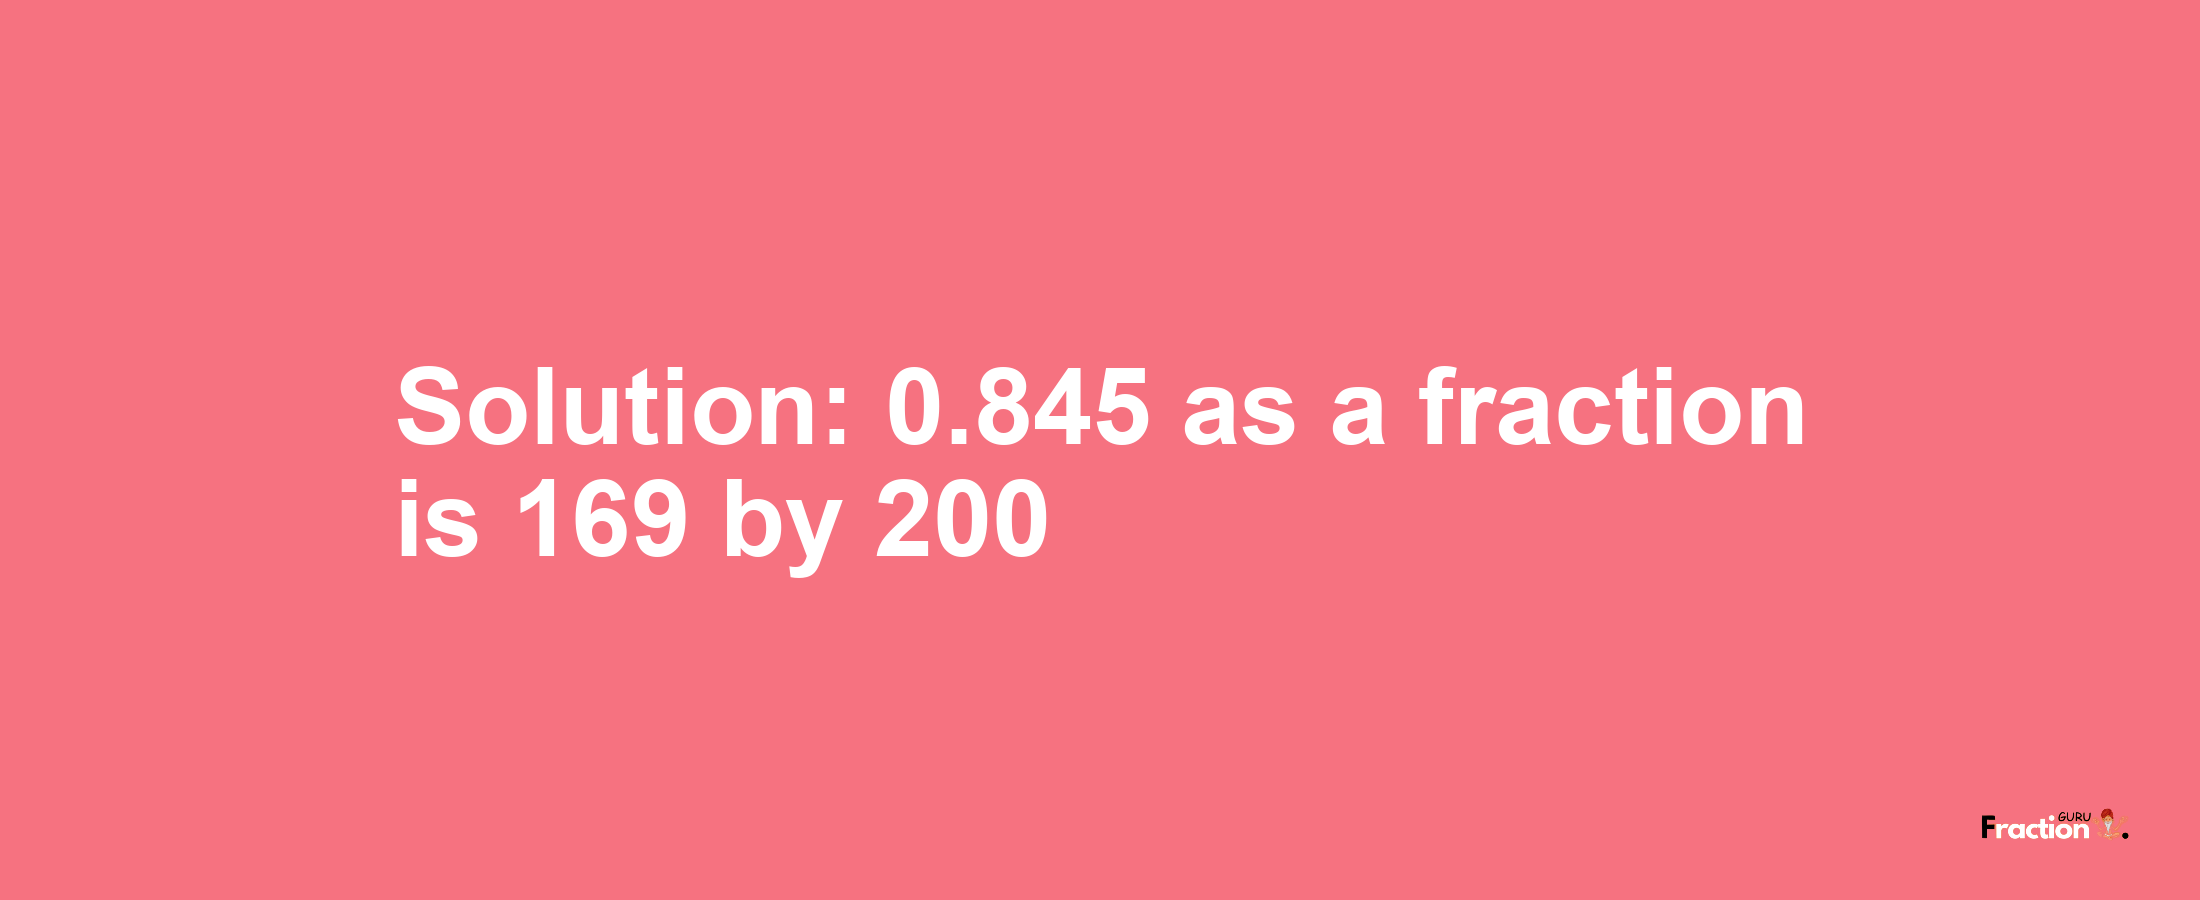 Solution:0.845 as a fraction is 169/200